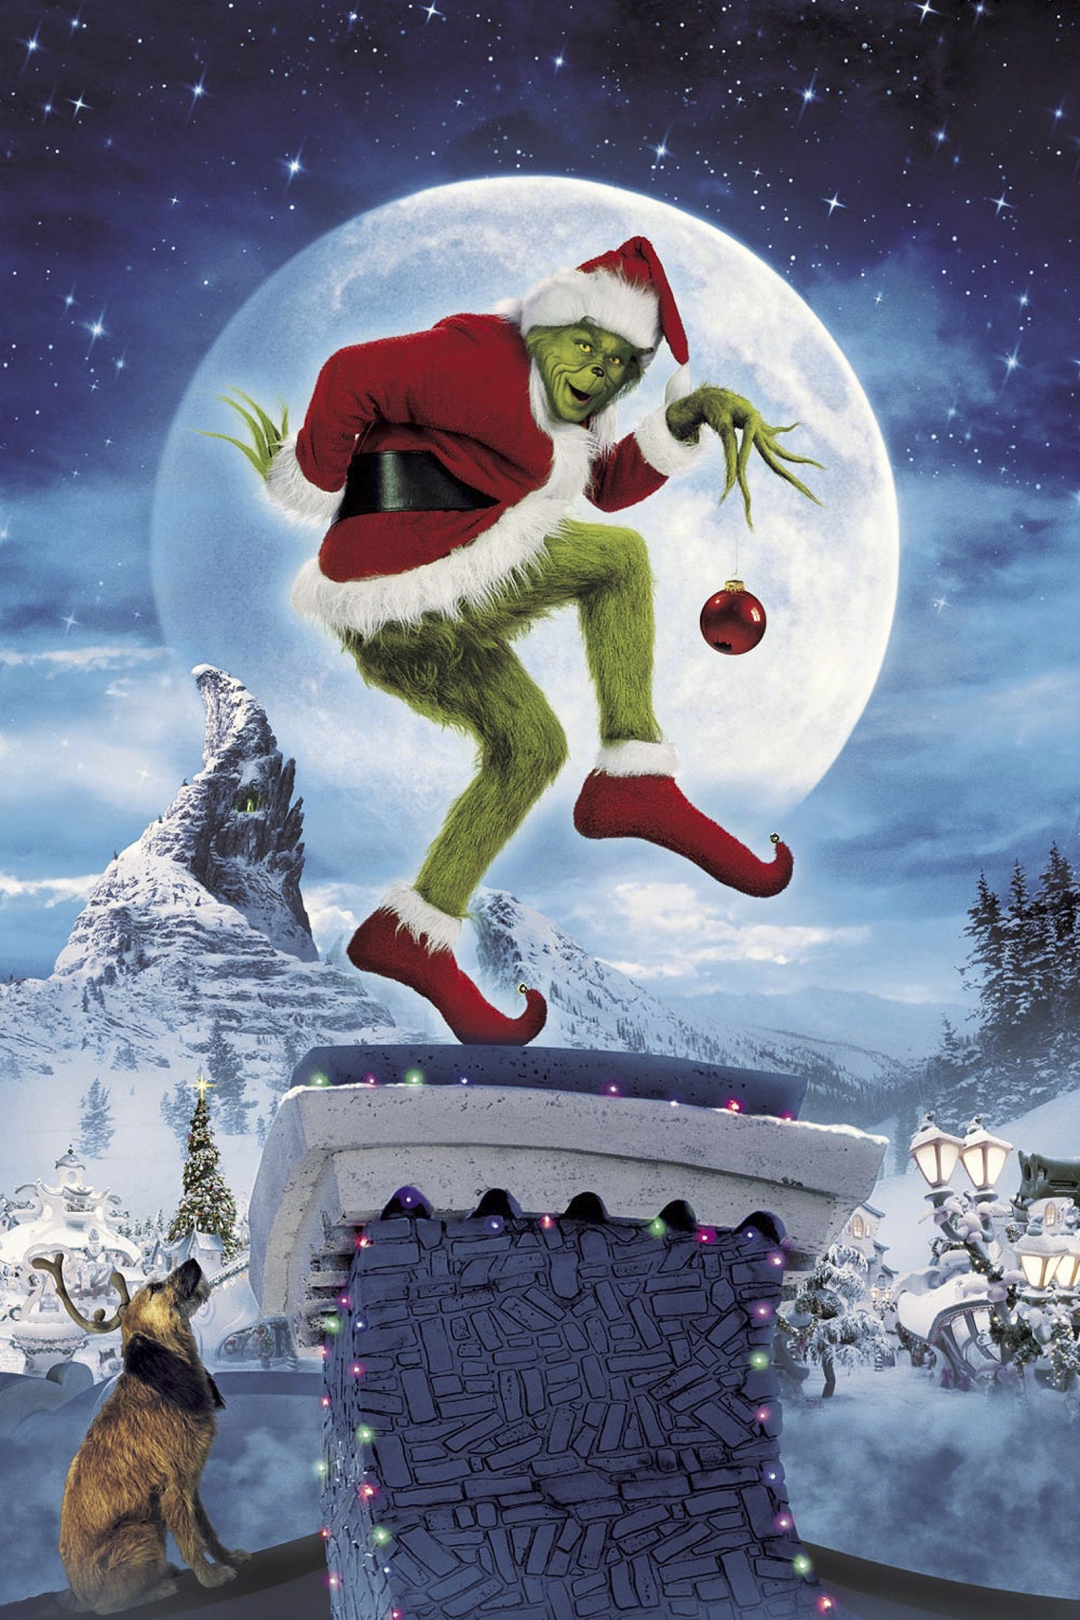 Dr. Seuss’s How the Grinch Stole Christmas